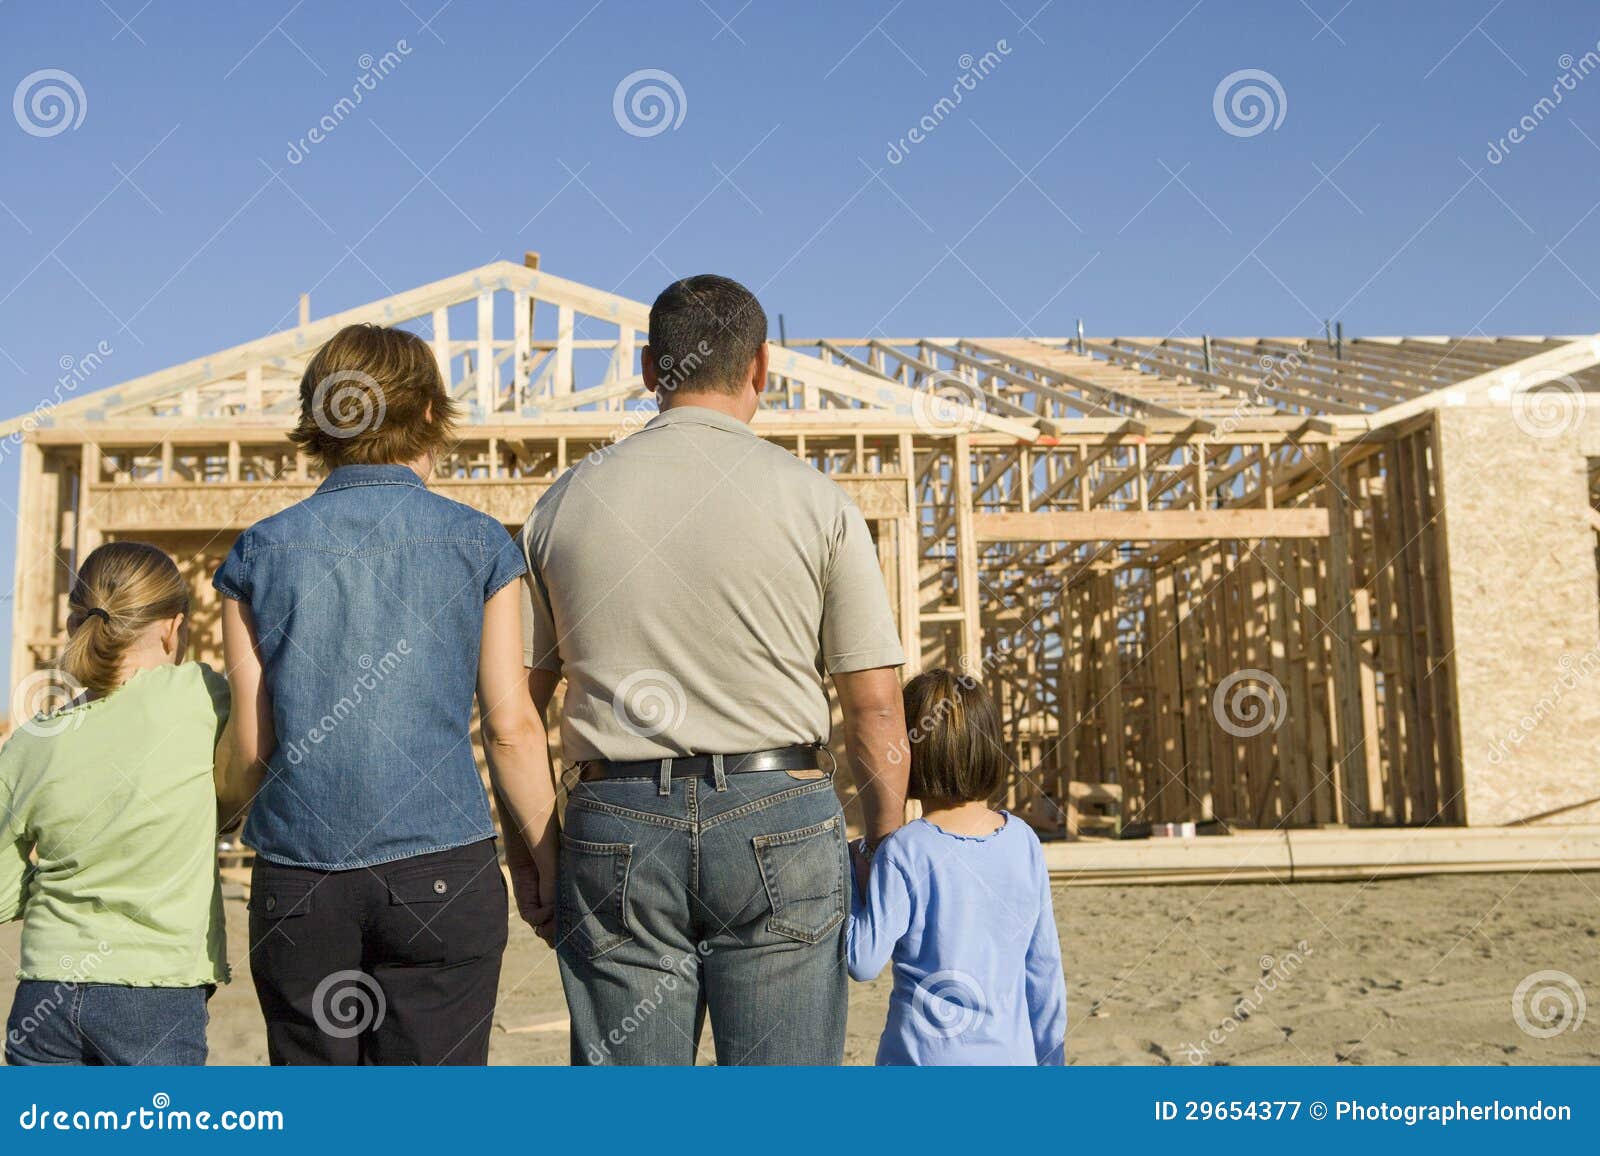 family in front of incomplete house